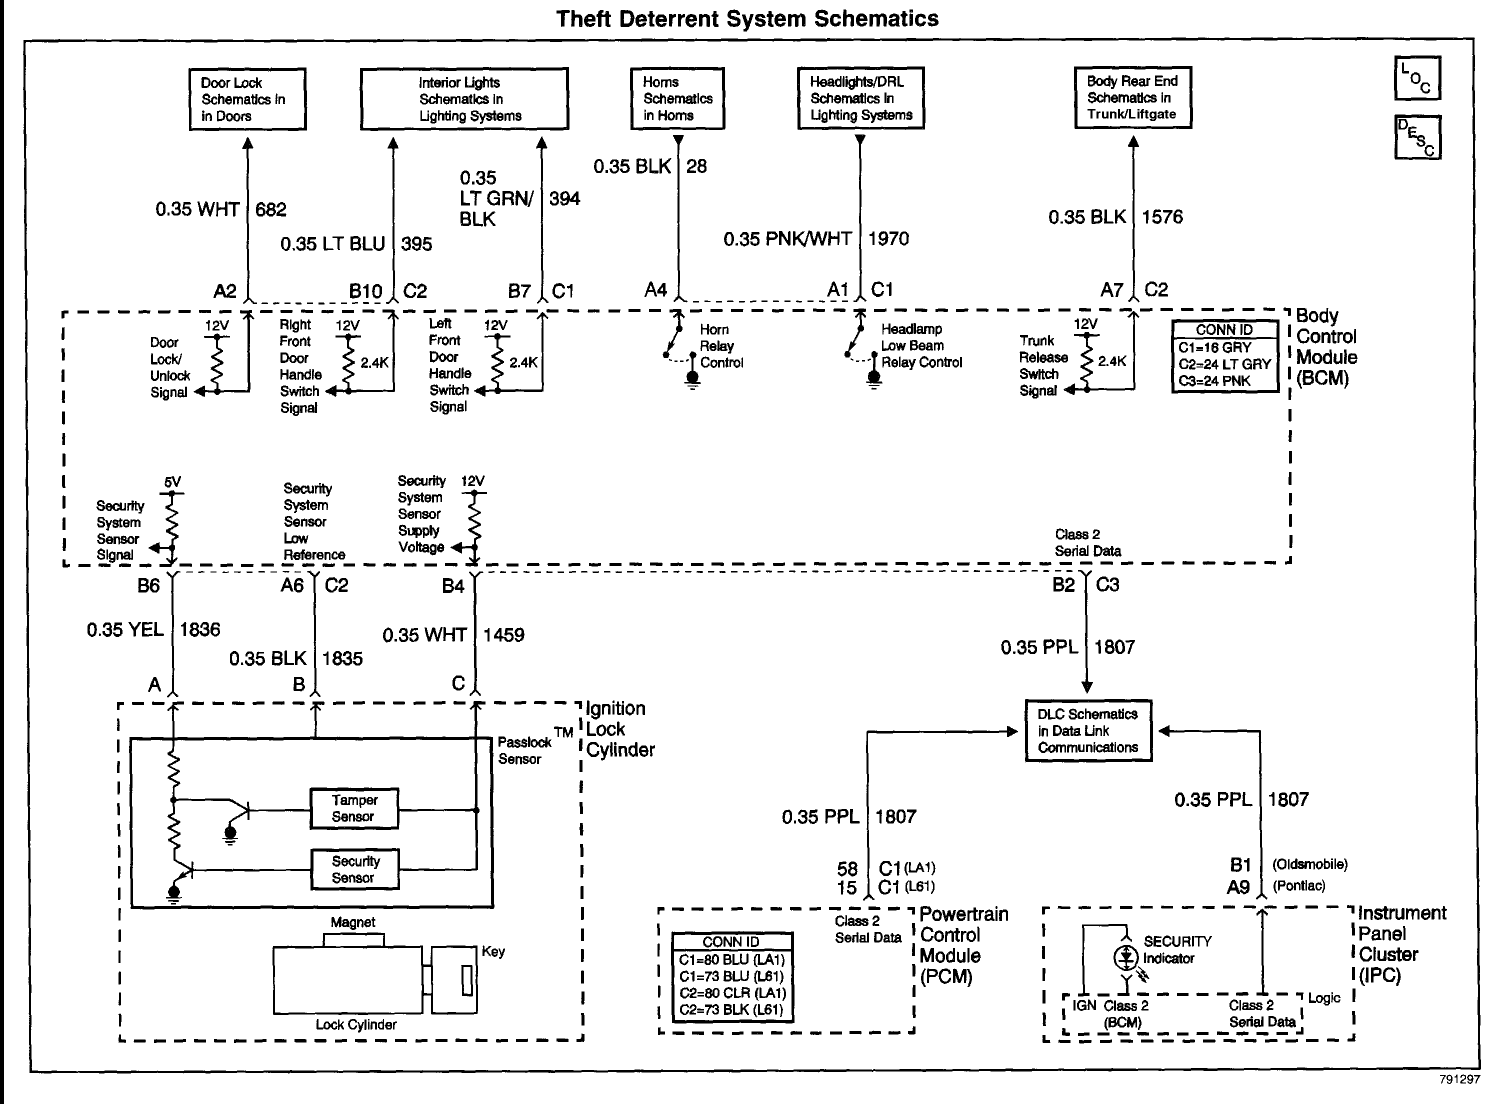 wiring diagram for security light vats on a 1996 grand prix 3.1